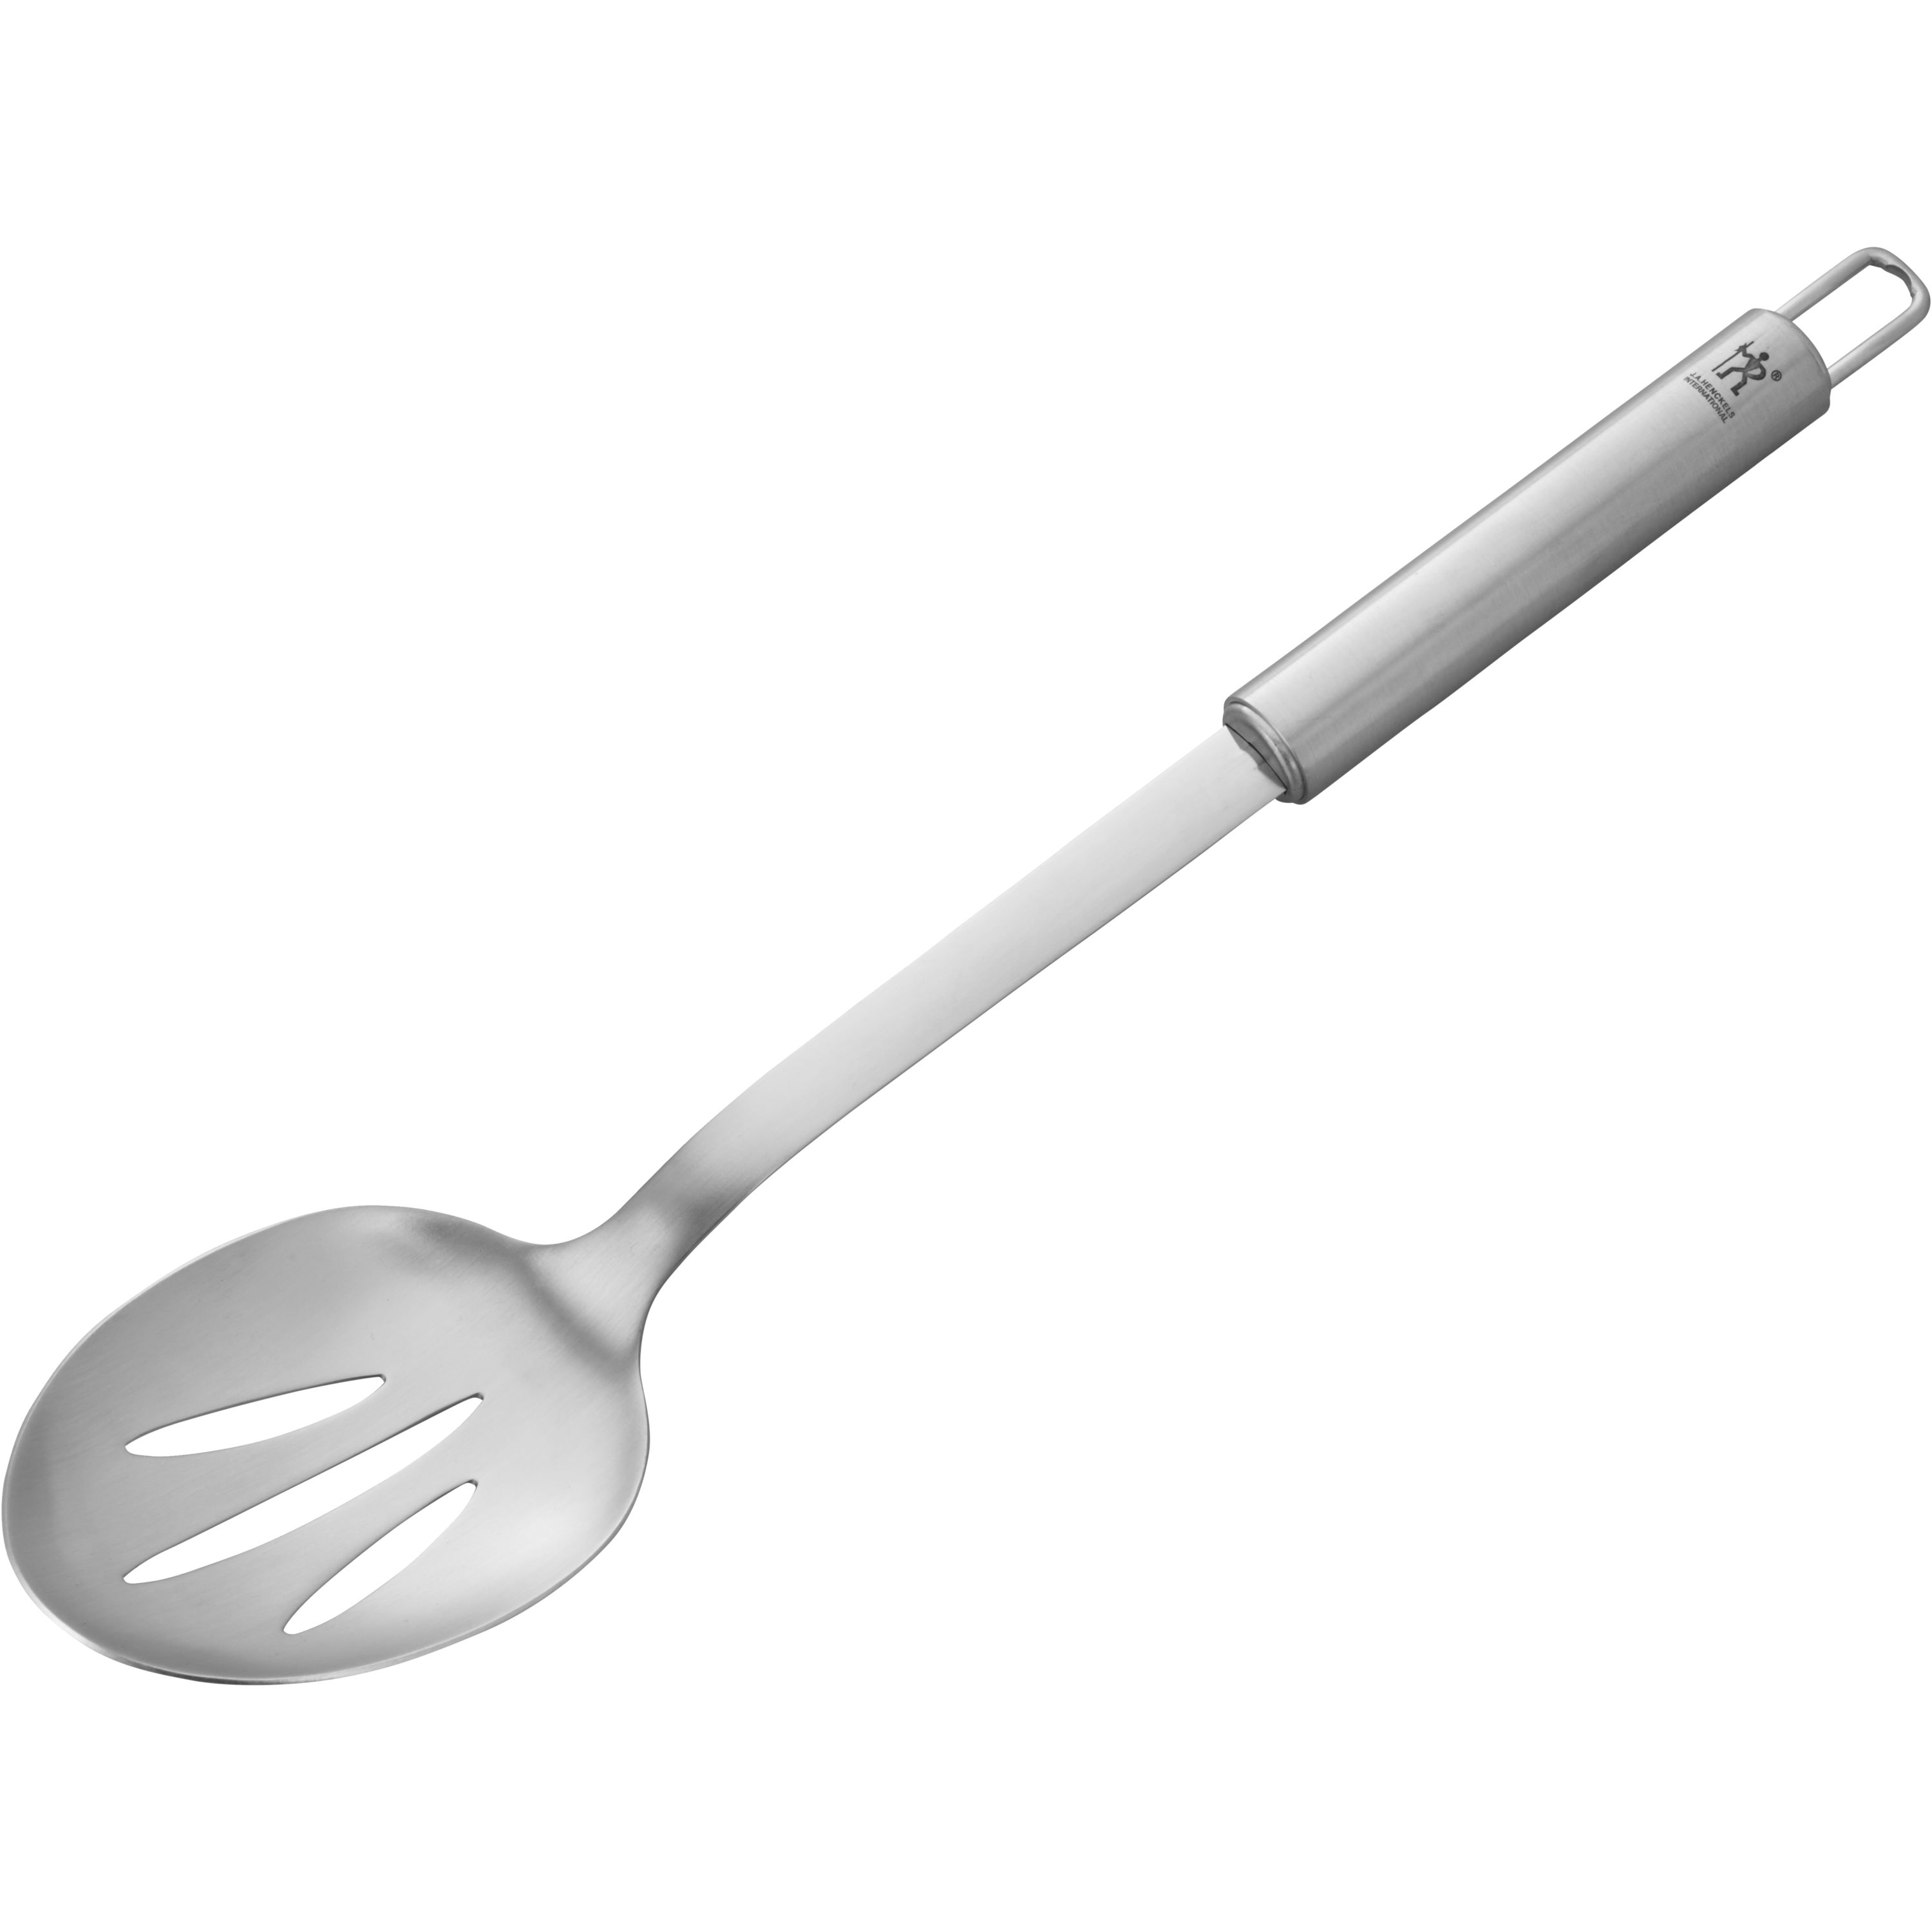 New Heavy Stainless Steel Cooking & Serving Spoon (Set of 10)